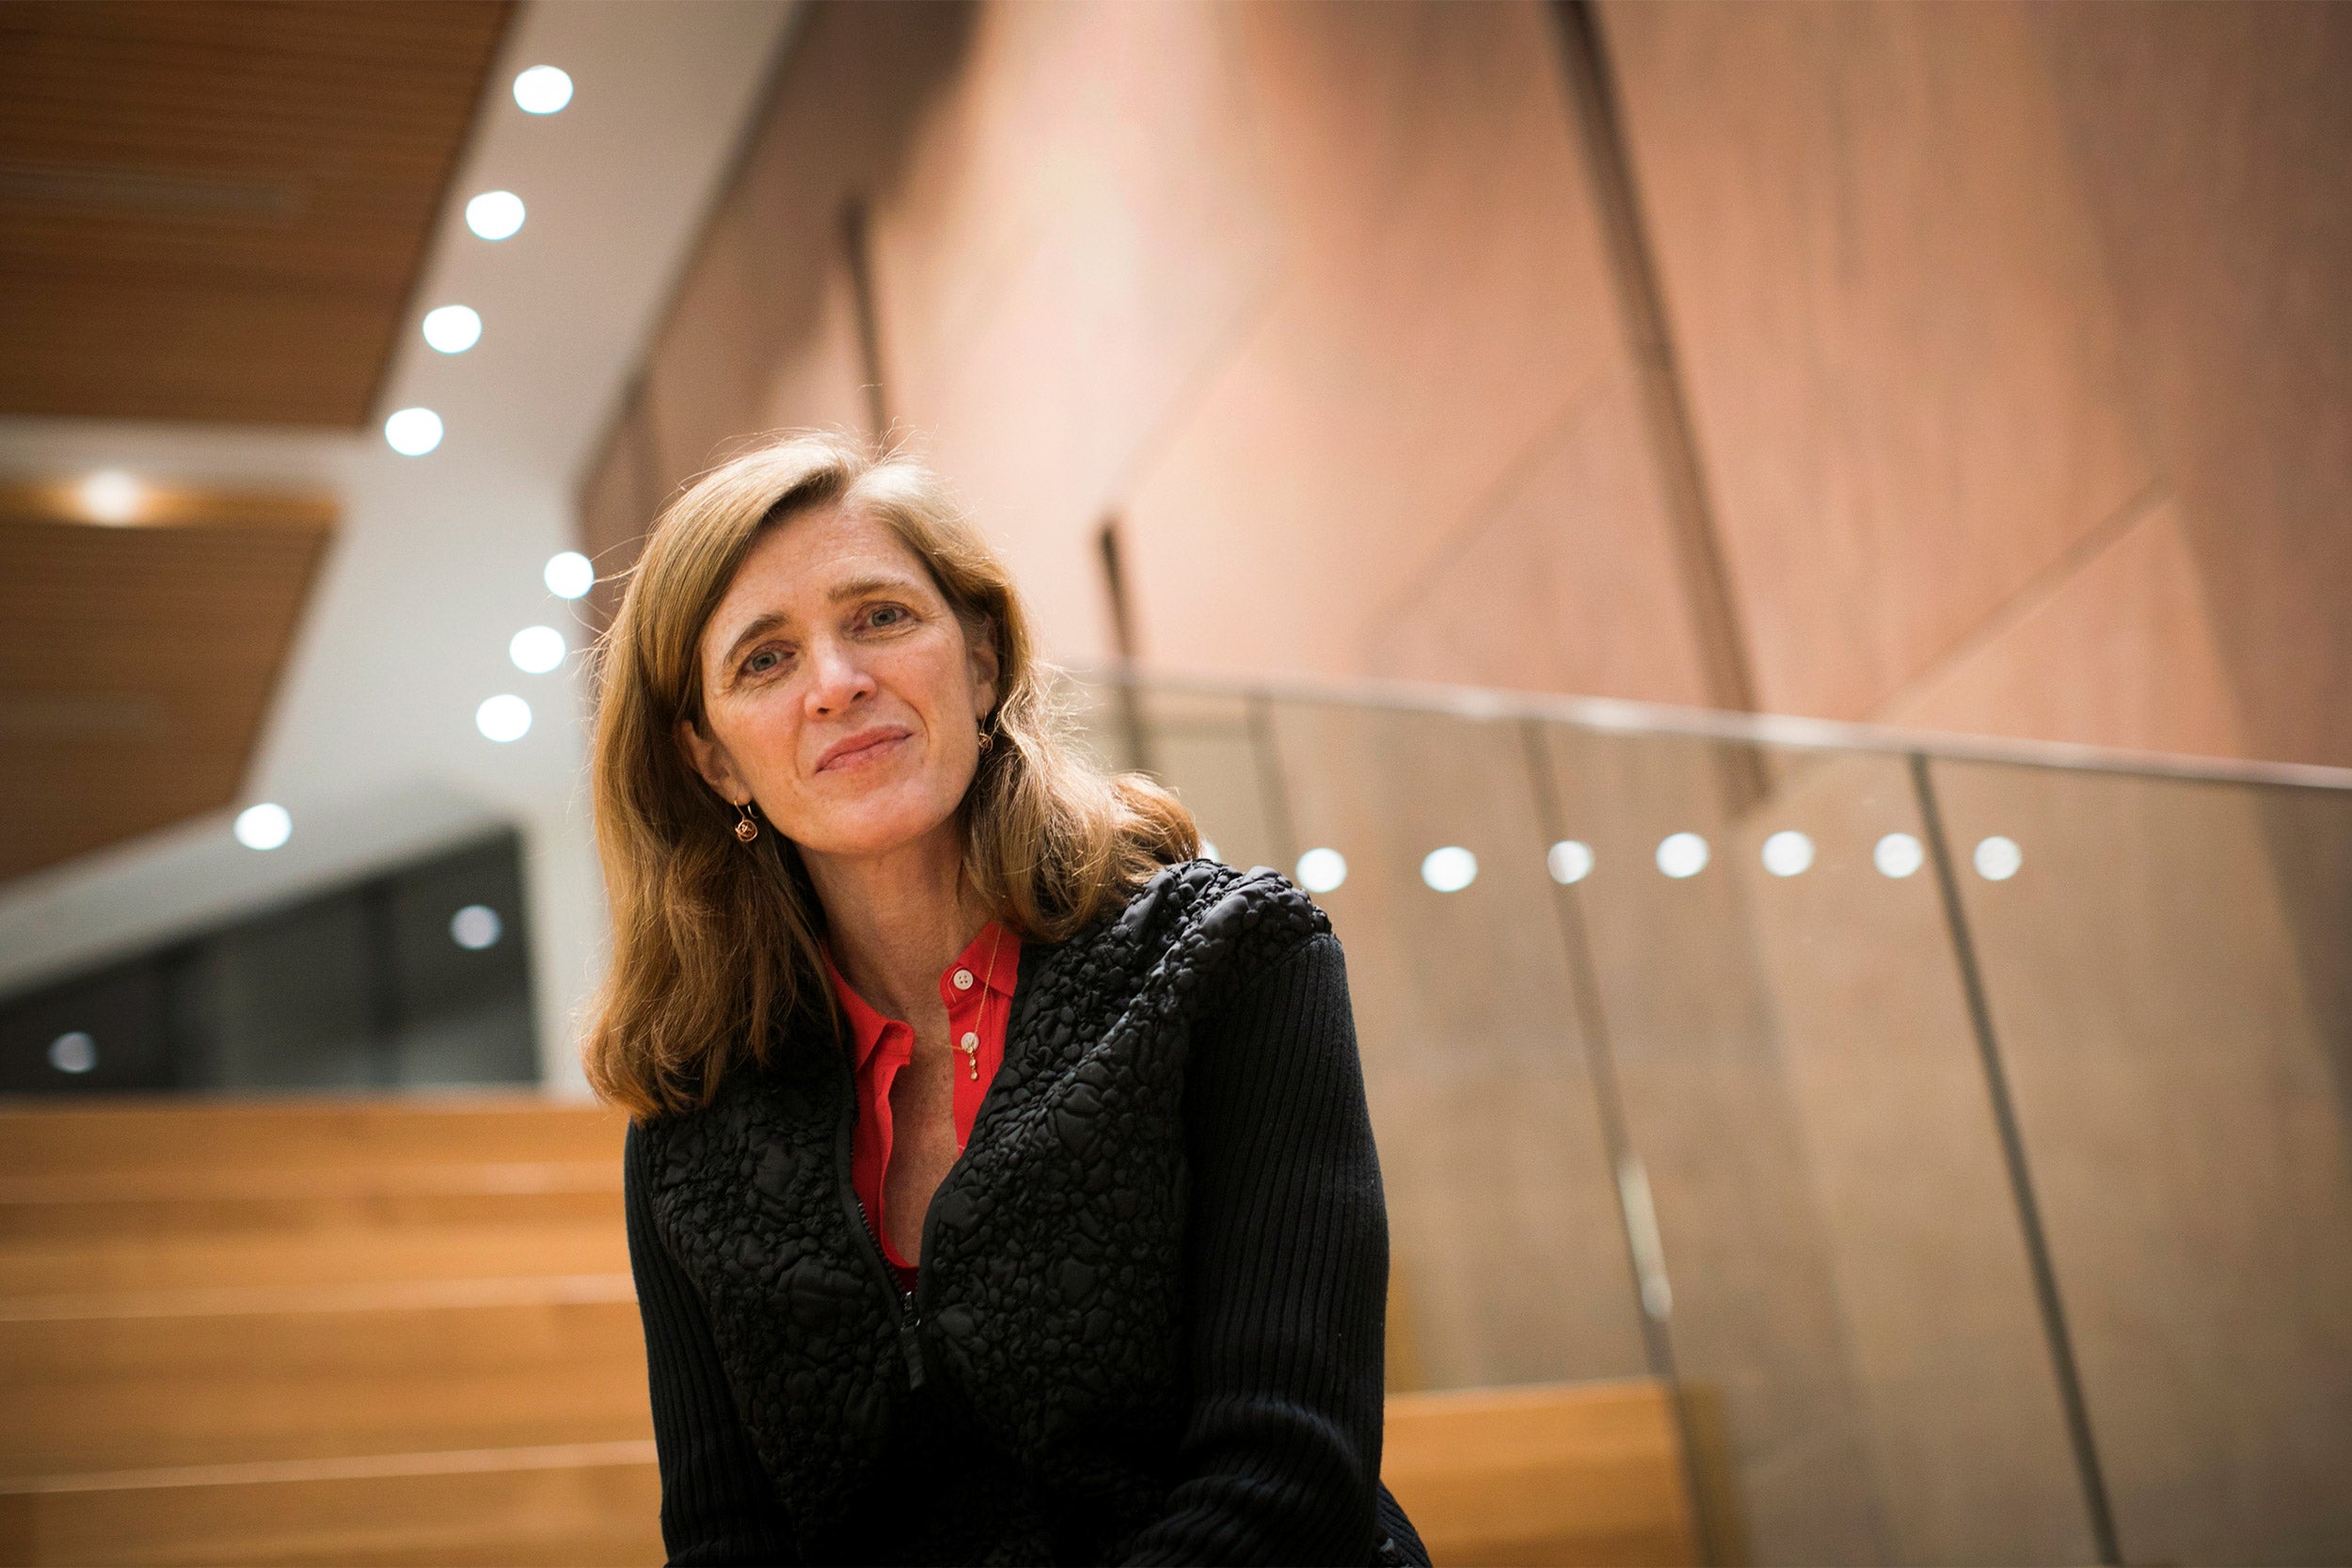 Former United Nations Ambassador Samantha Power is pictured at Harvard Kennedy School